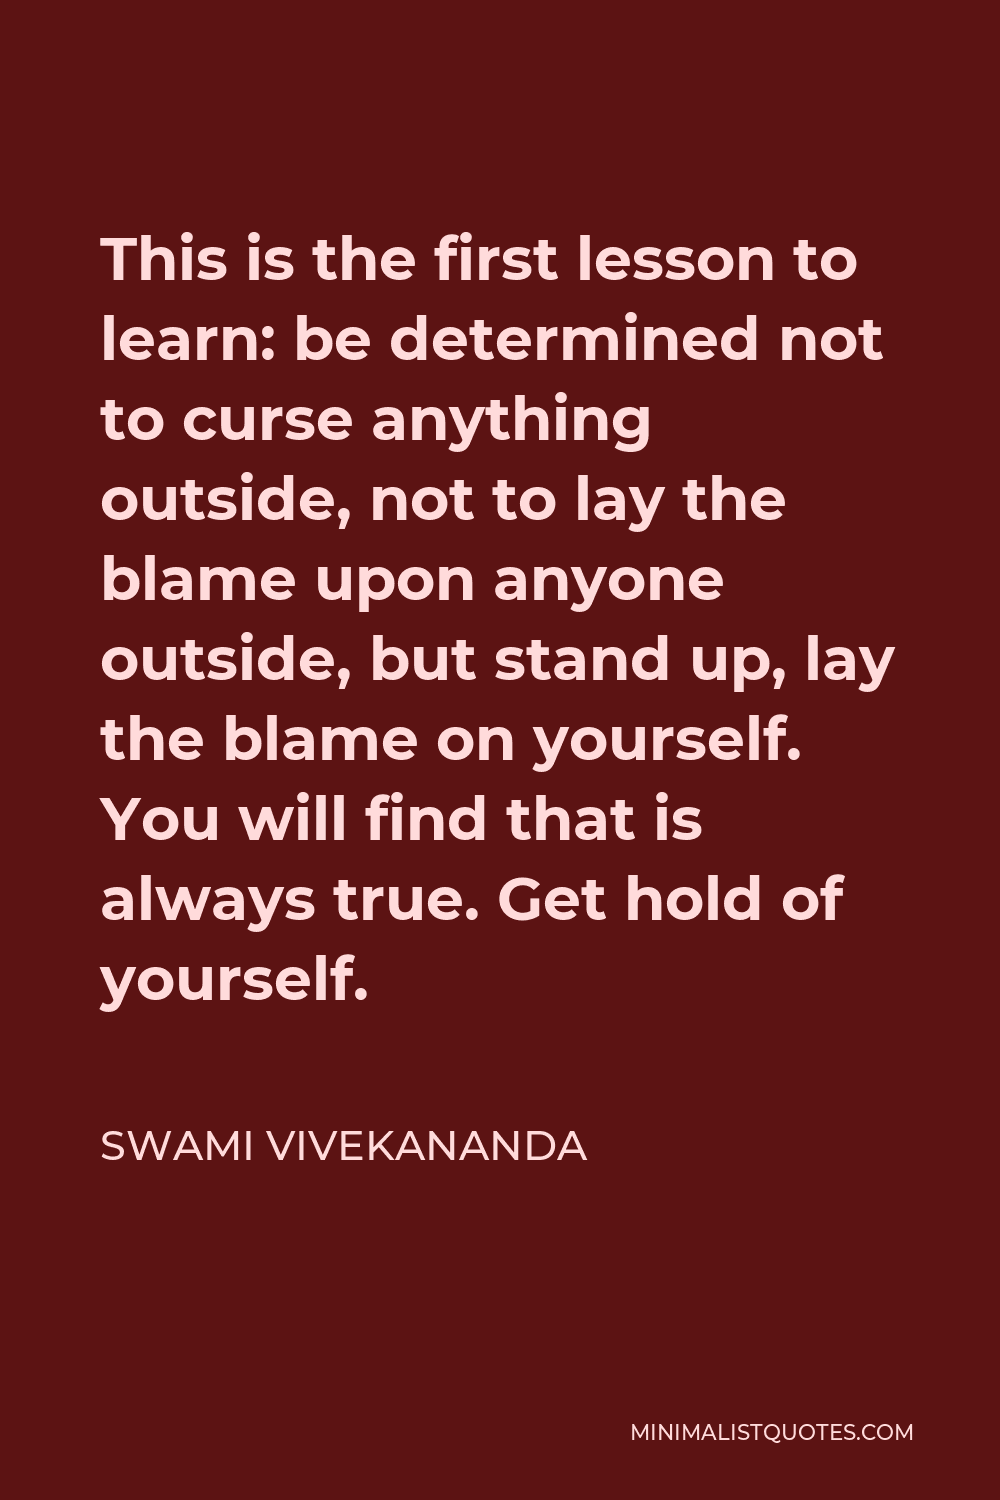 Swami Vivekananda Quote - This is the first lesson to learn: be determined not to curse anything outside, not to lay the blame upon anyone outside, but stand up, lay the blame on yourself. You will find that is always true. Get hold of yourself.